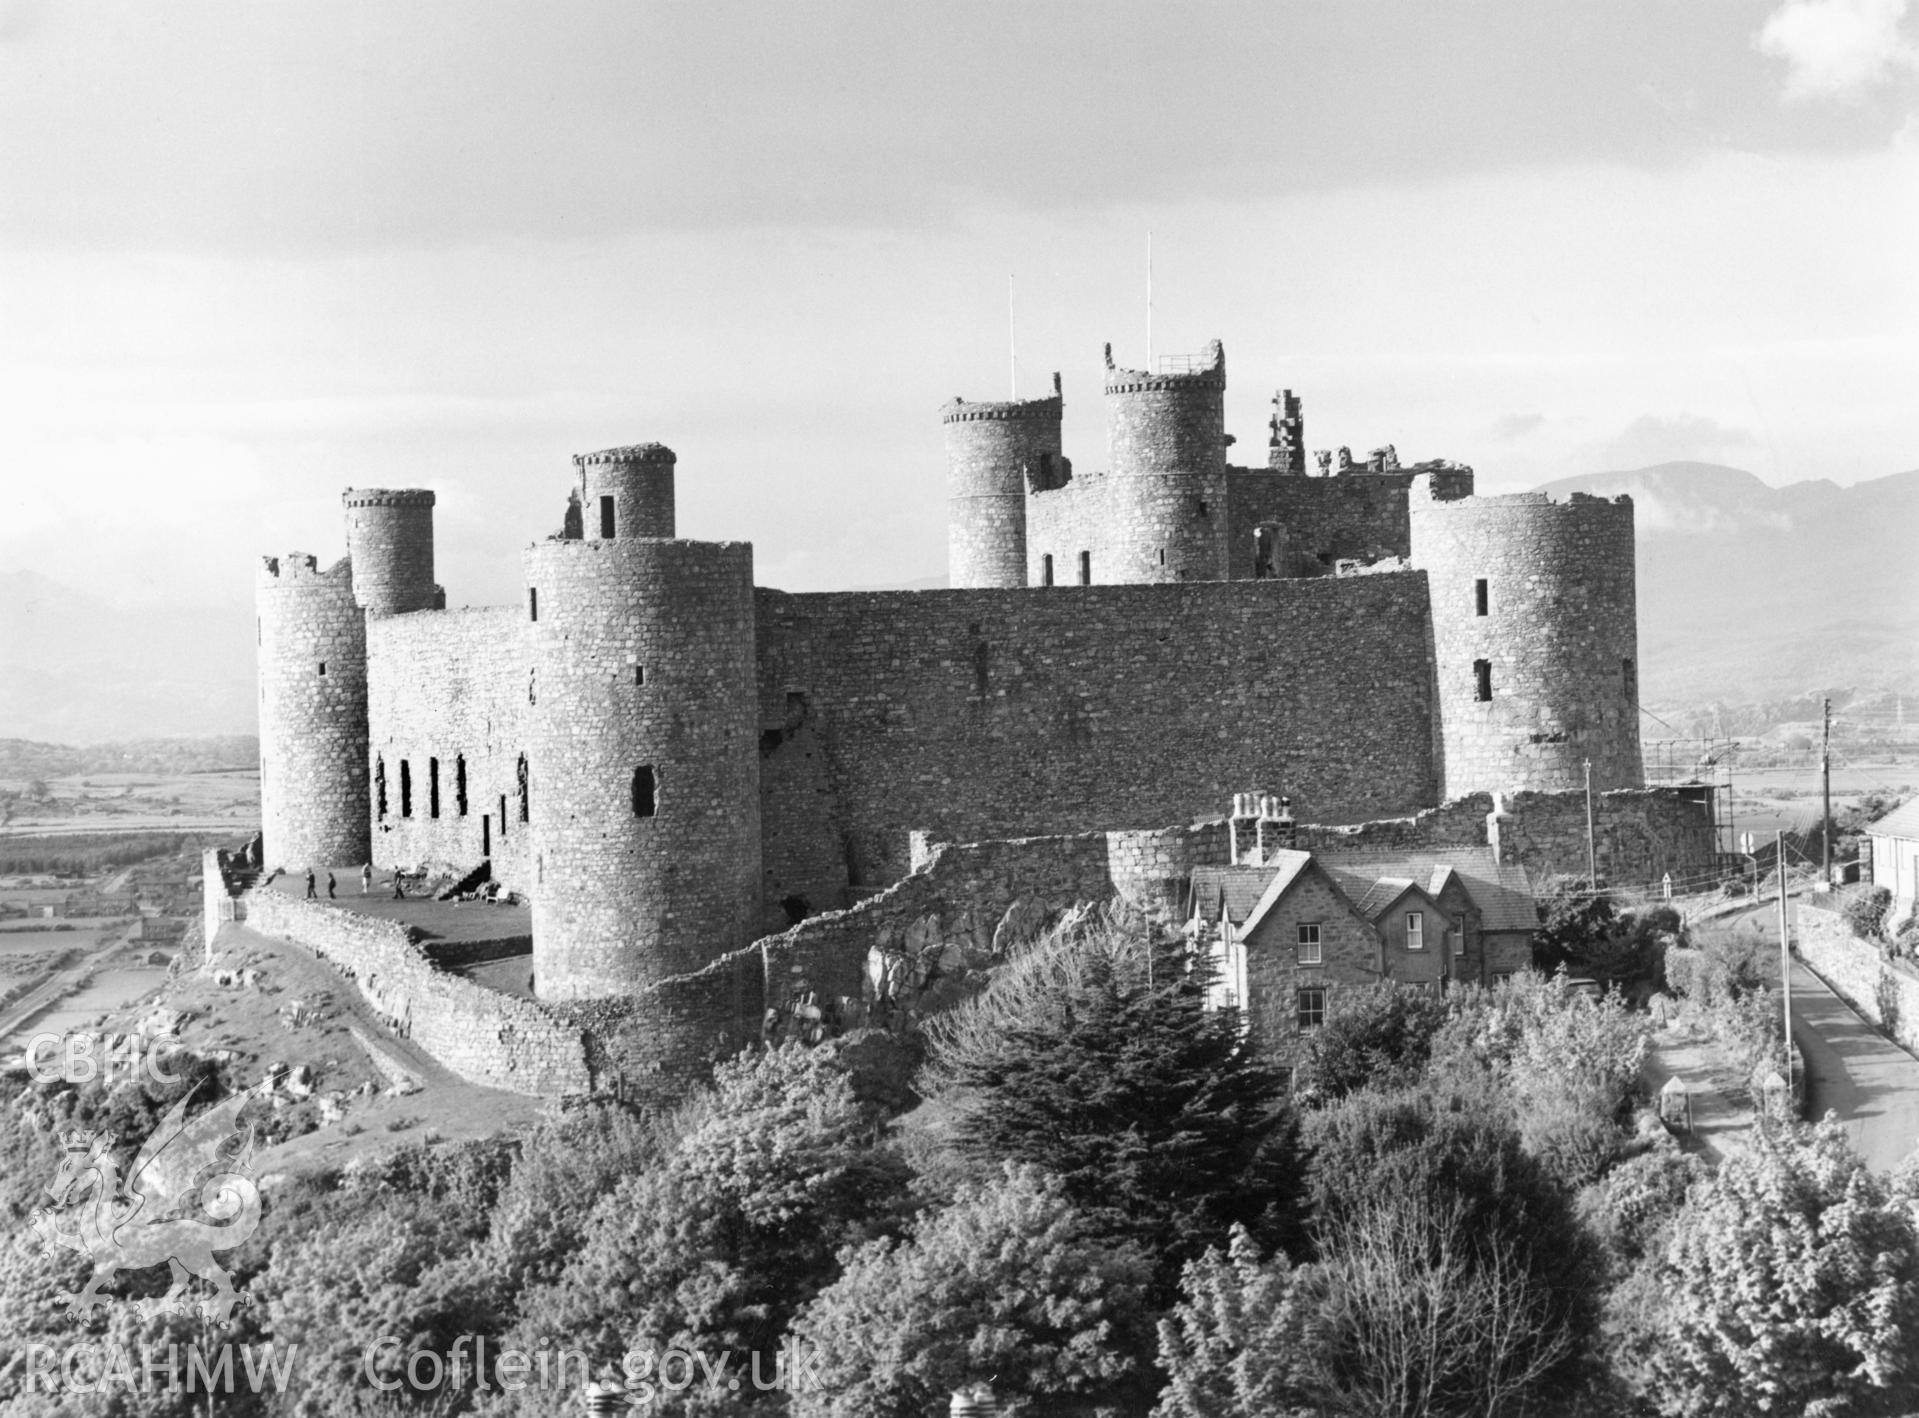 General view of Harlech Castle, taken in 1972, from the Central Office of Information.